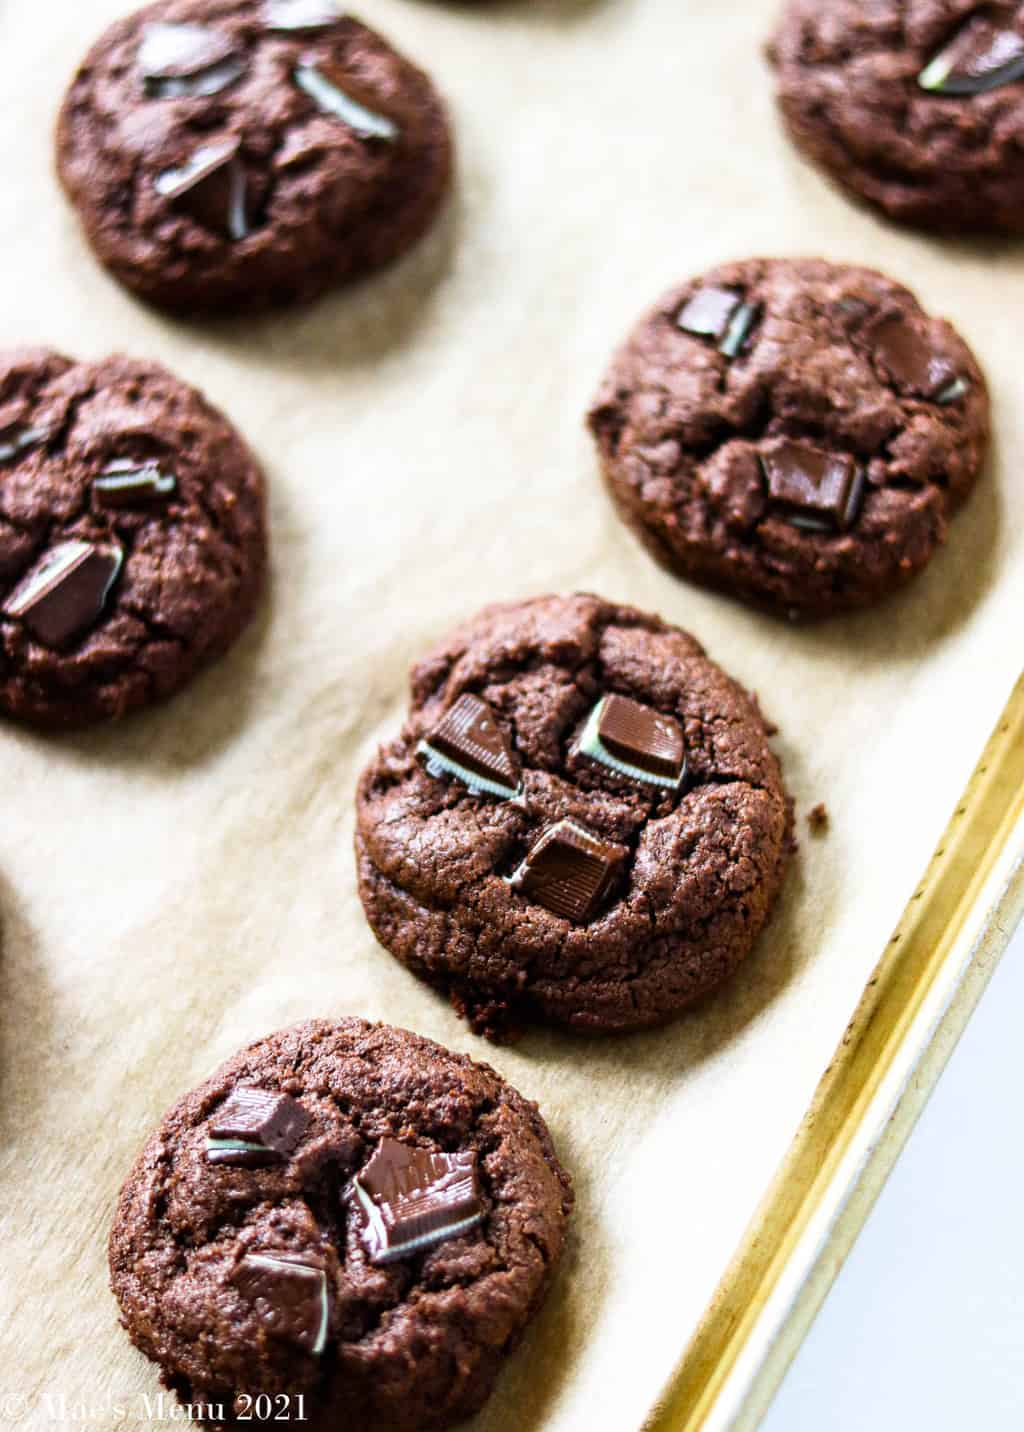 An up-close angled shot of baked andes mint chocolate cookies